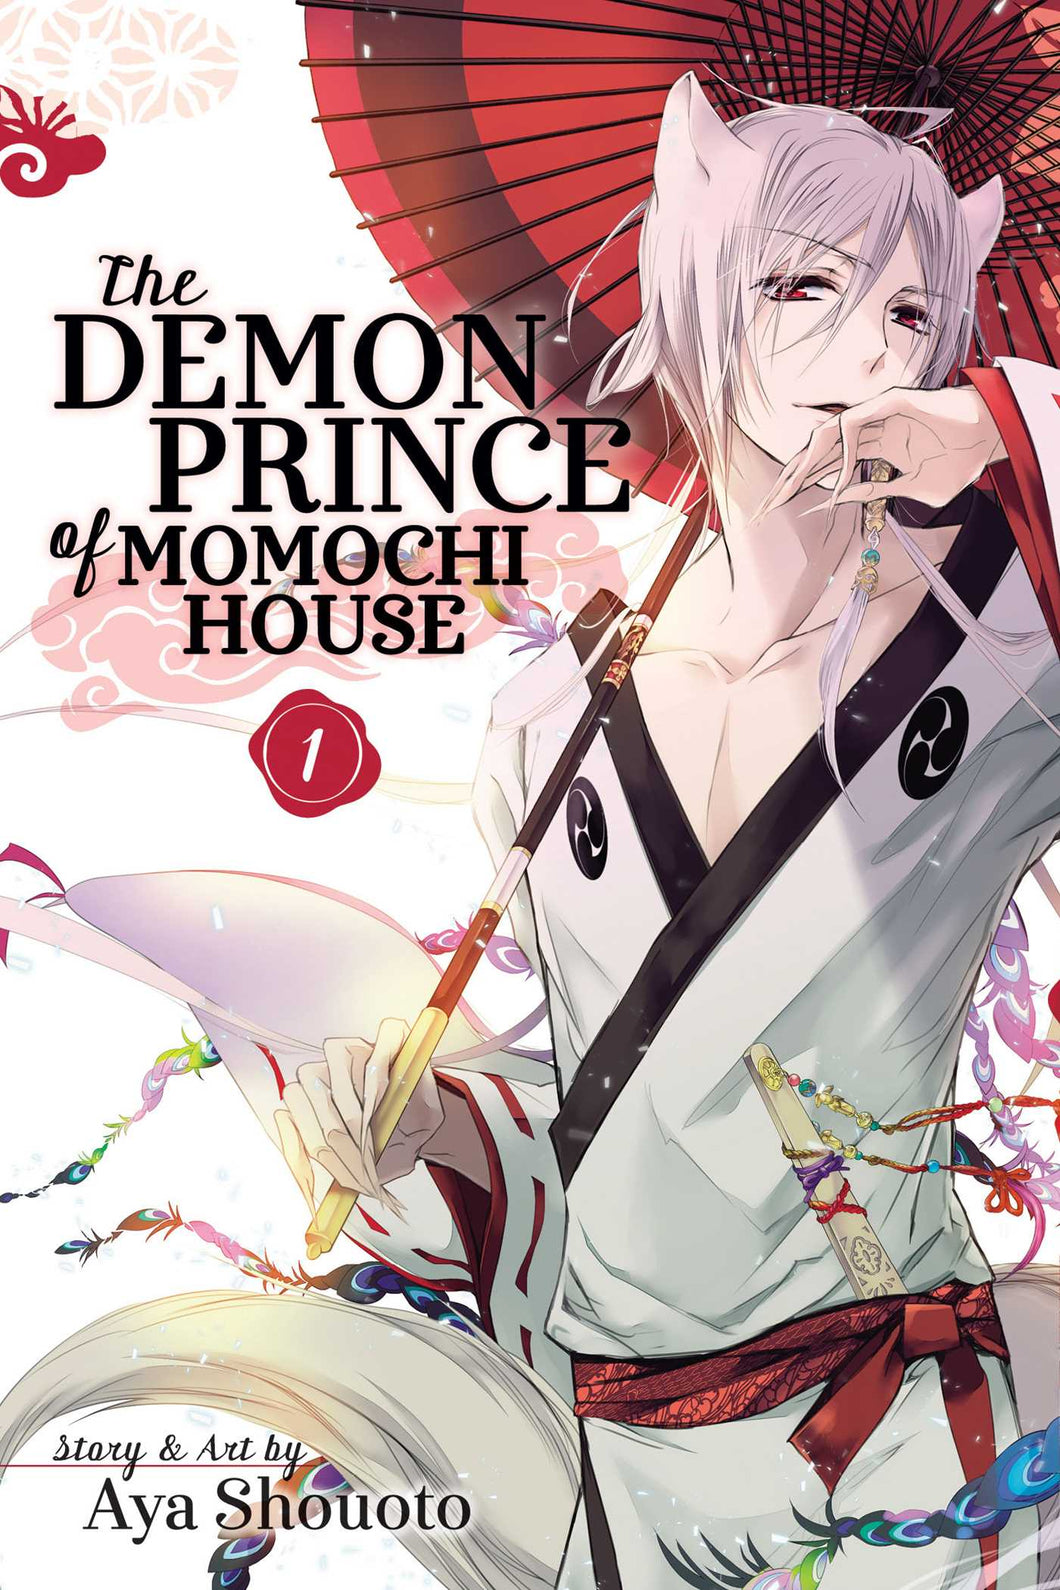 The Demon Prince Of Momochi House Volume 1